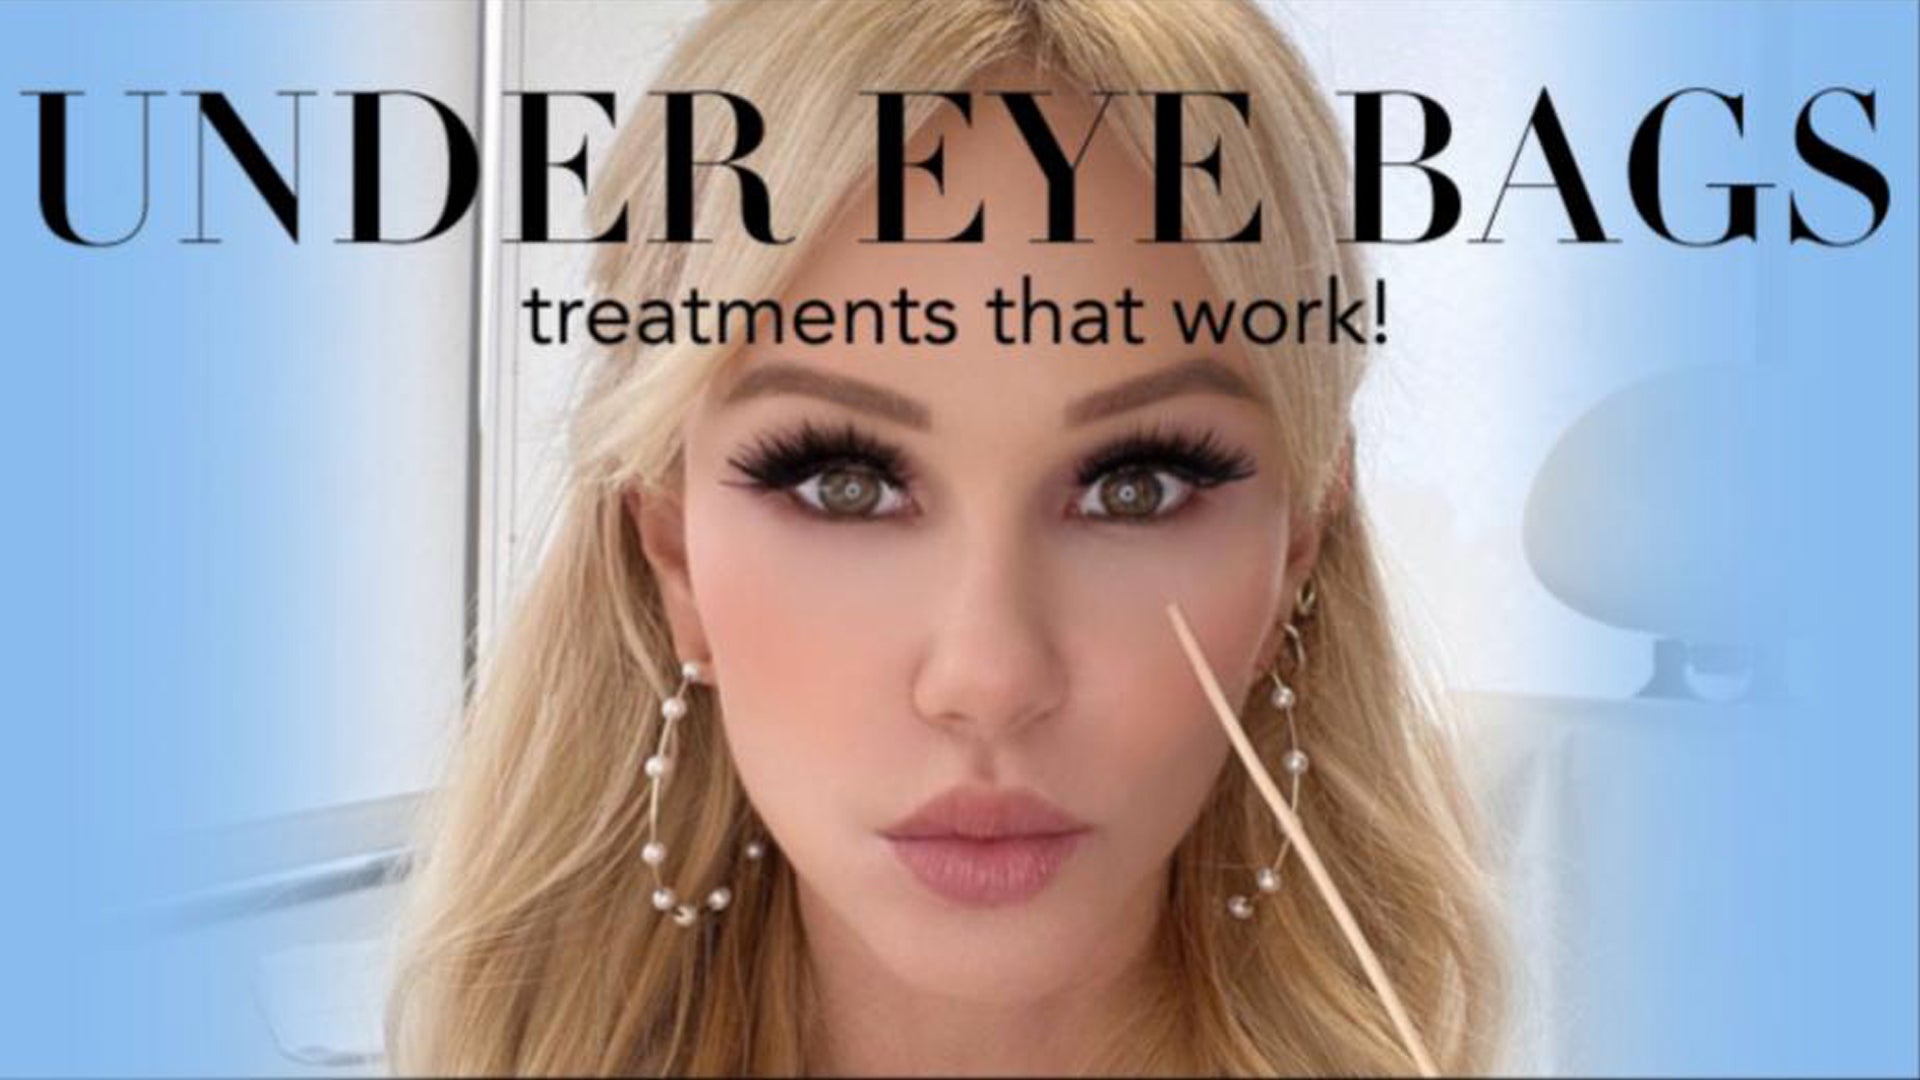 Treatments for under eye bags that actually work!